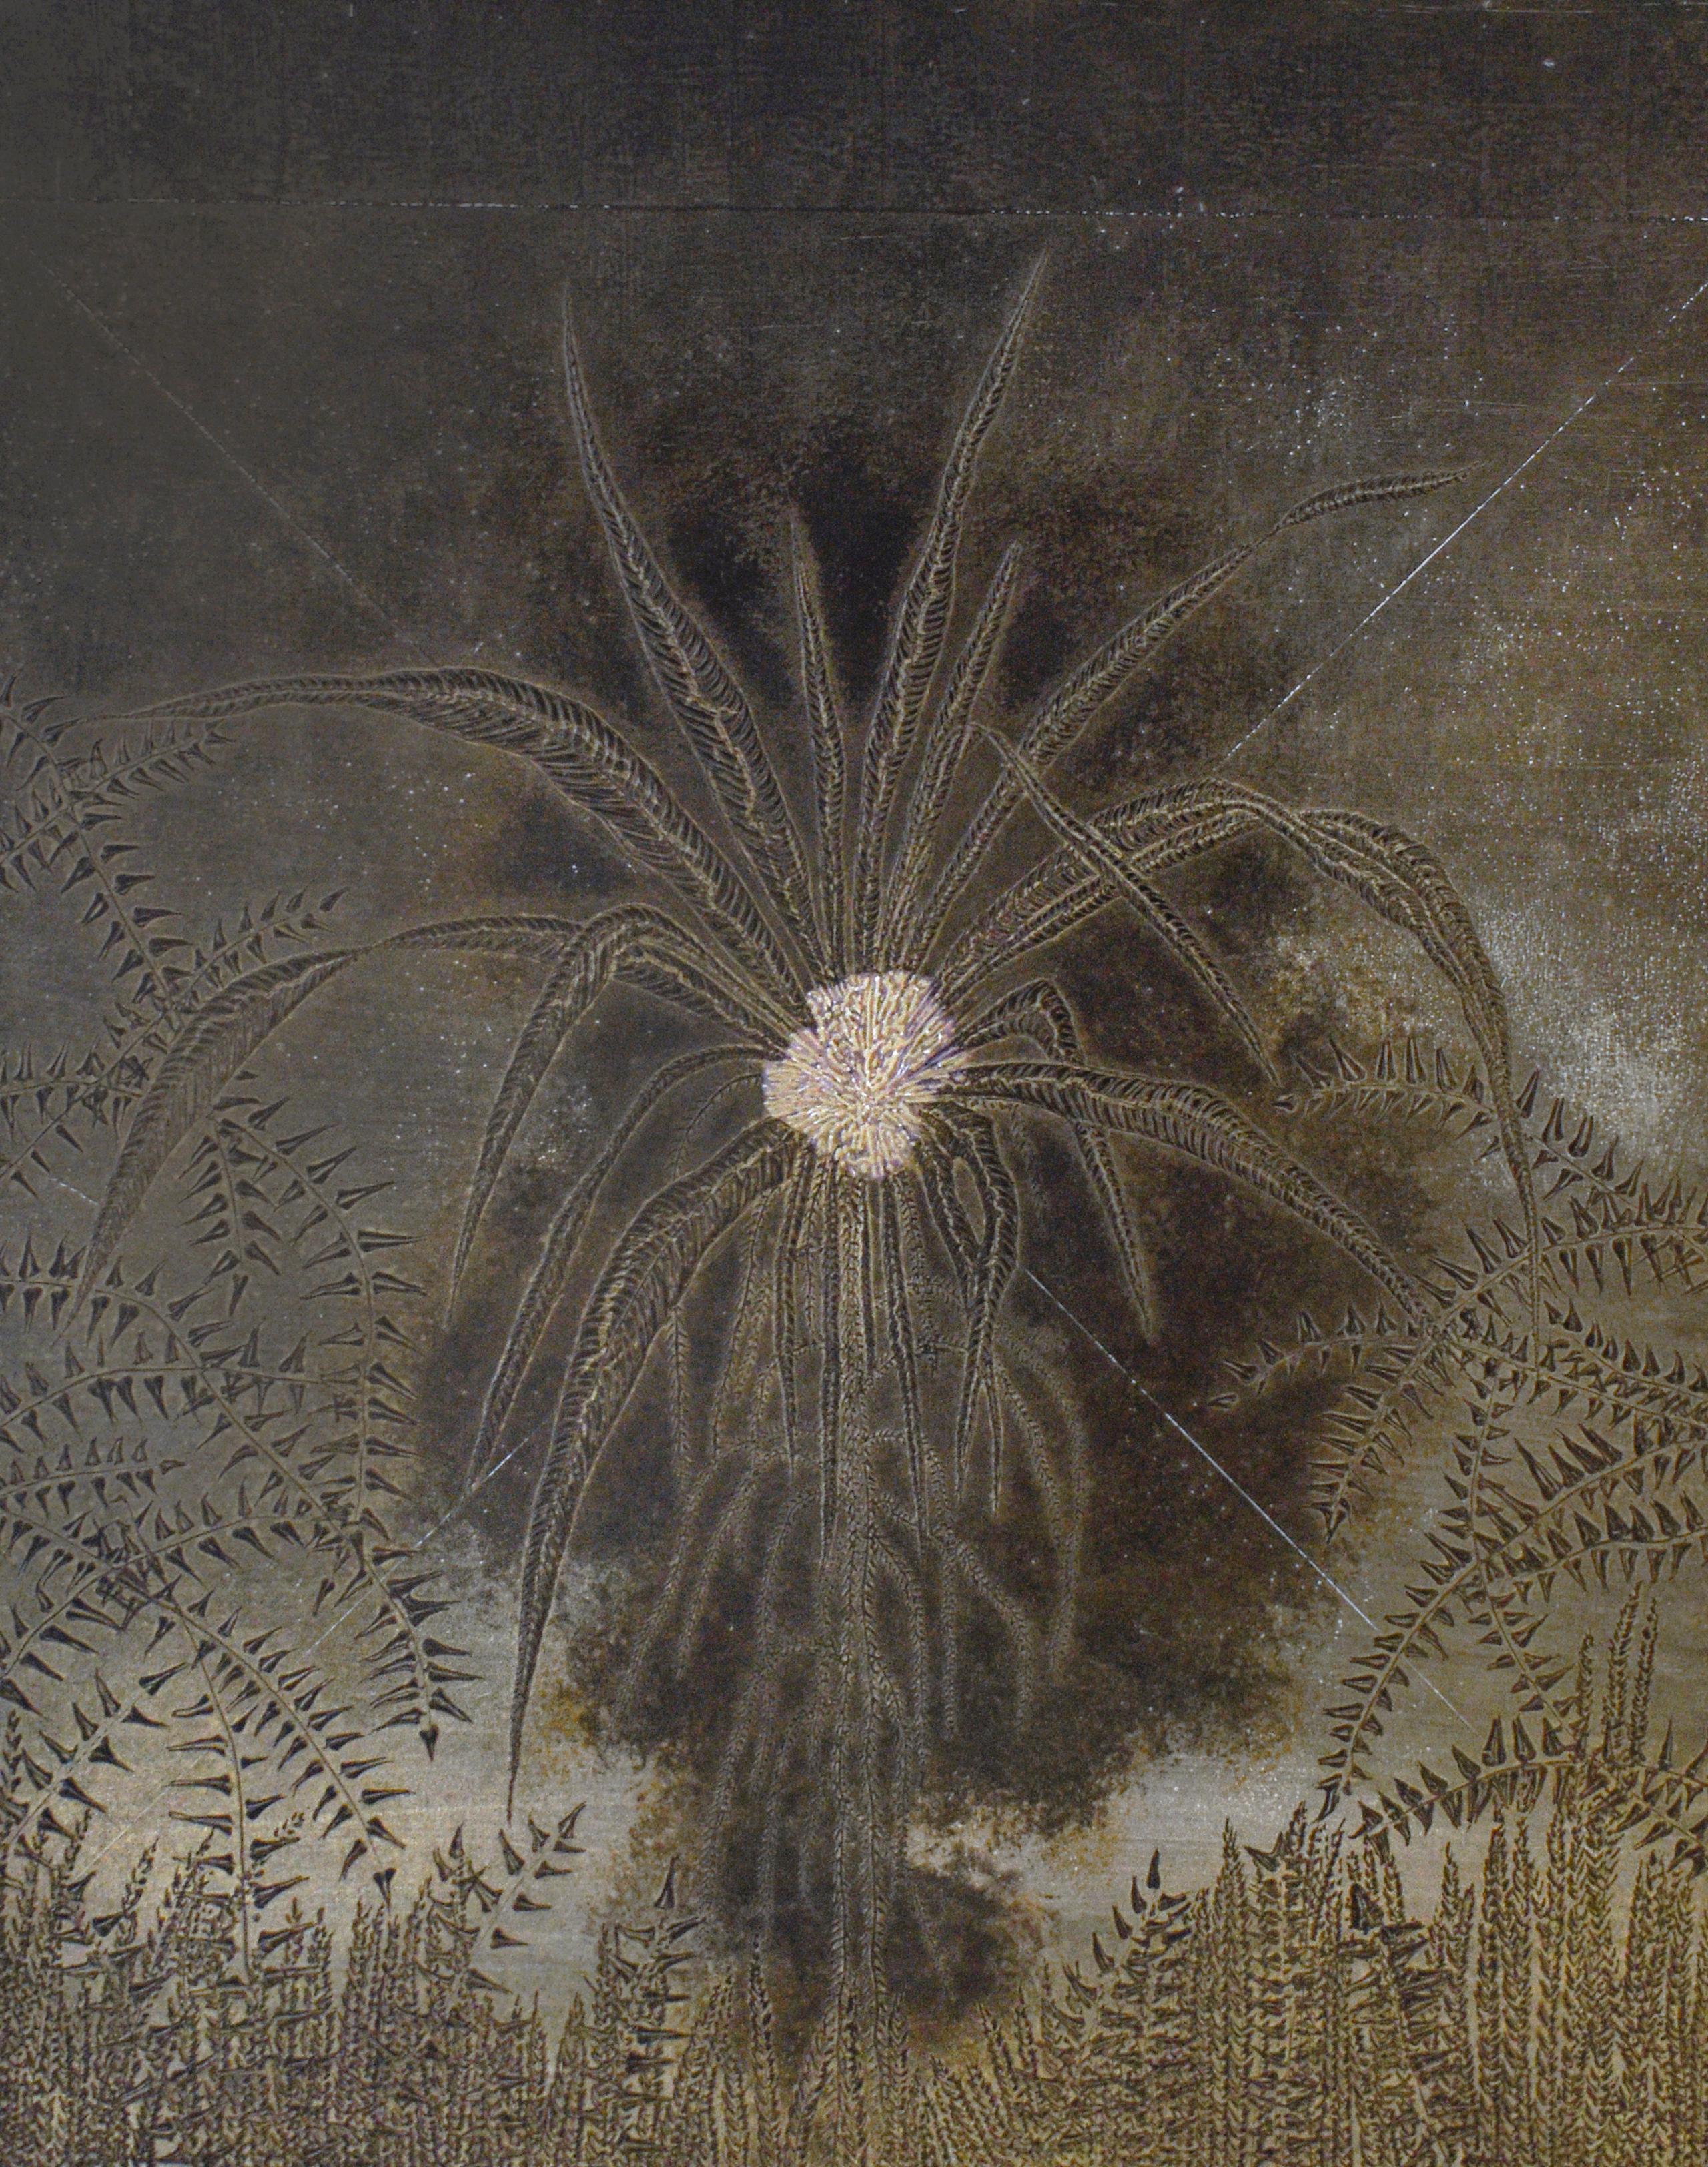 Frank Faulkner Landscape Painting - Abstract Flora III: Minimalist Abstract Landscape of Dark Silver & Bronze Leaves